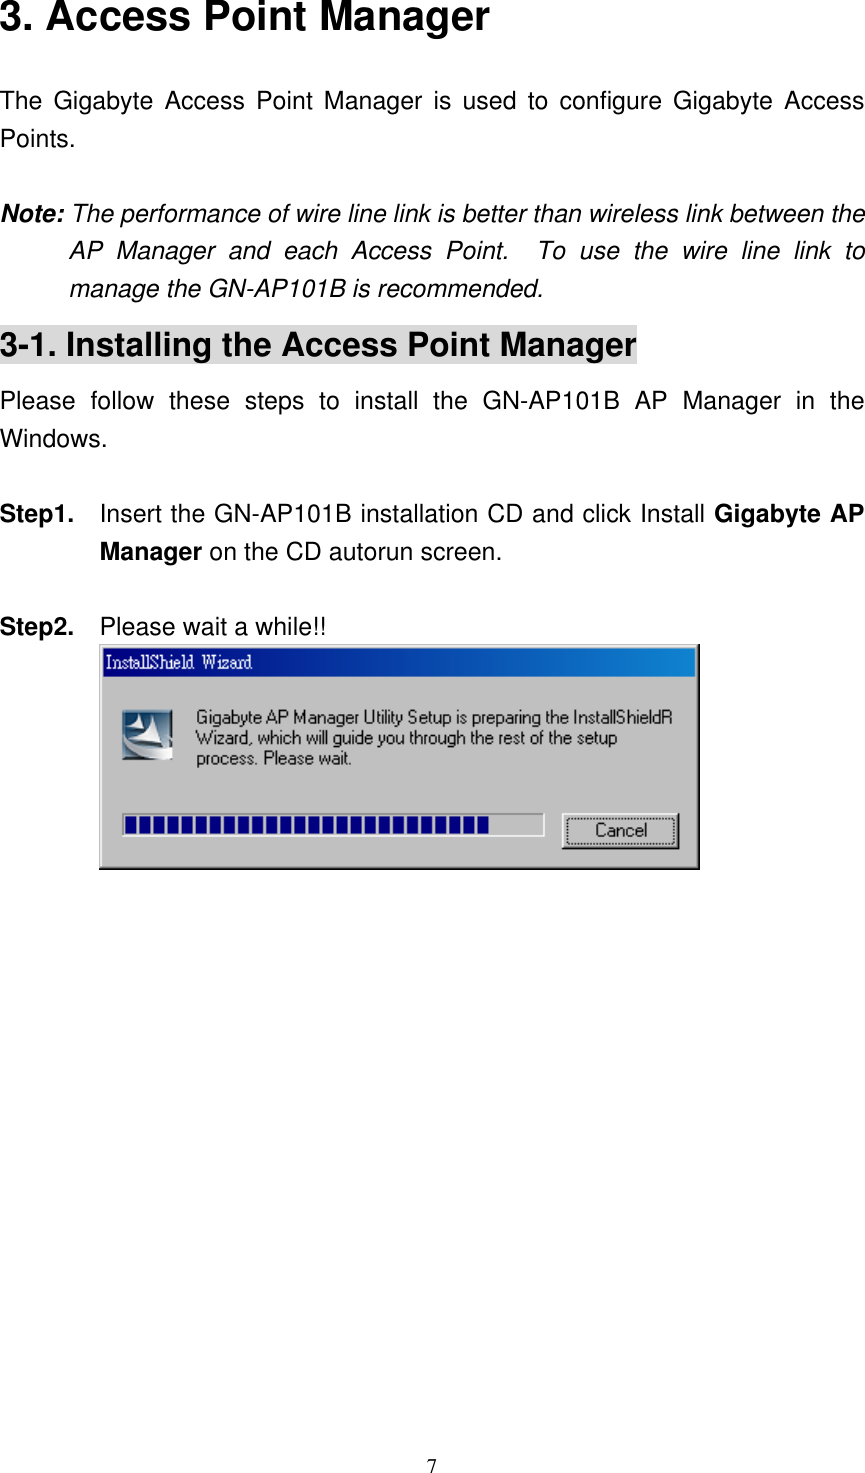 7  3. Access Point Manager The Gigabyte Access Point Manager is used to configure Gigabyte Access Points.  Note: The performance of wire line link is better than wireless link between the AP Manager and each Access Point.  To use the wire line link to manage the GN-AP101B is recommended. 3-1. Installing the Access Point Manager Please follow these steps to install the GN-AP101B AP Manager in the Windows.  Step1.  Insert the GN-AP101B installation CD and click Install Gigabyte AP Manager on the CD autorun screen.  Step2.    Please wait a while!!             